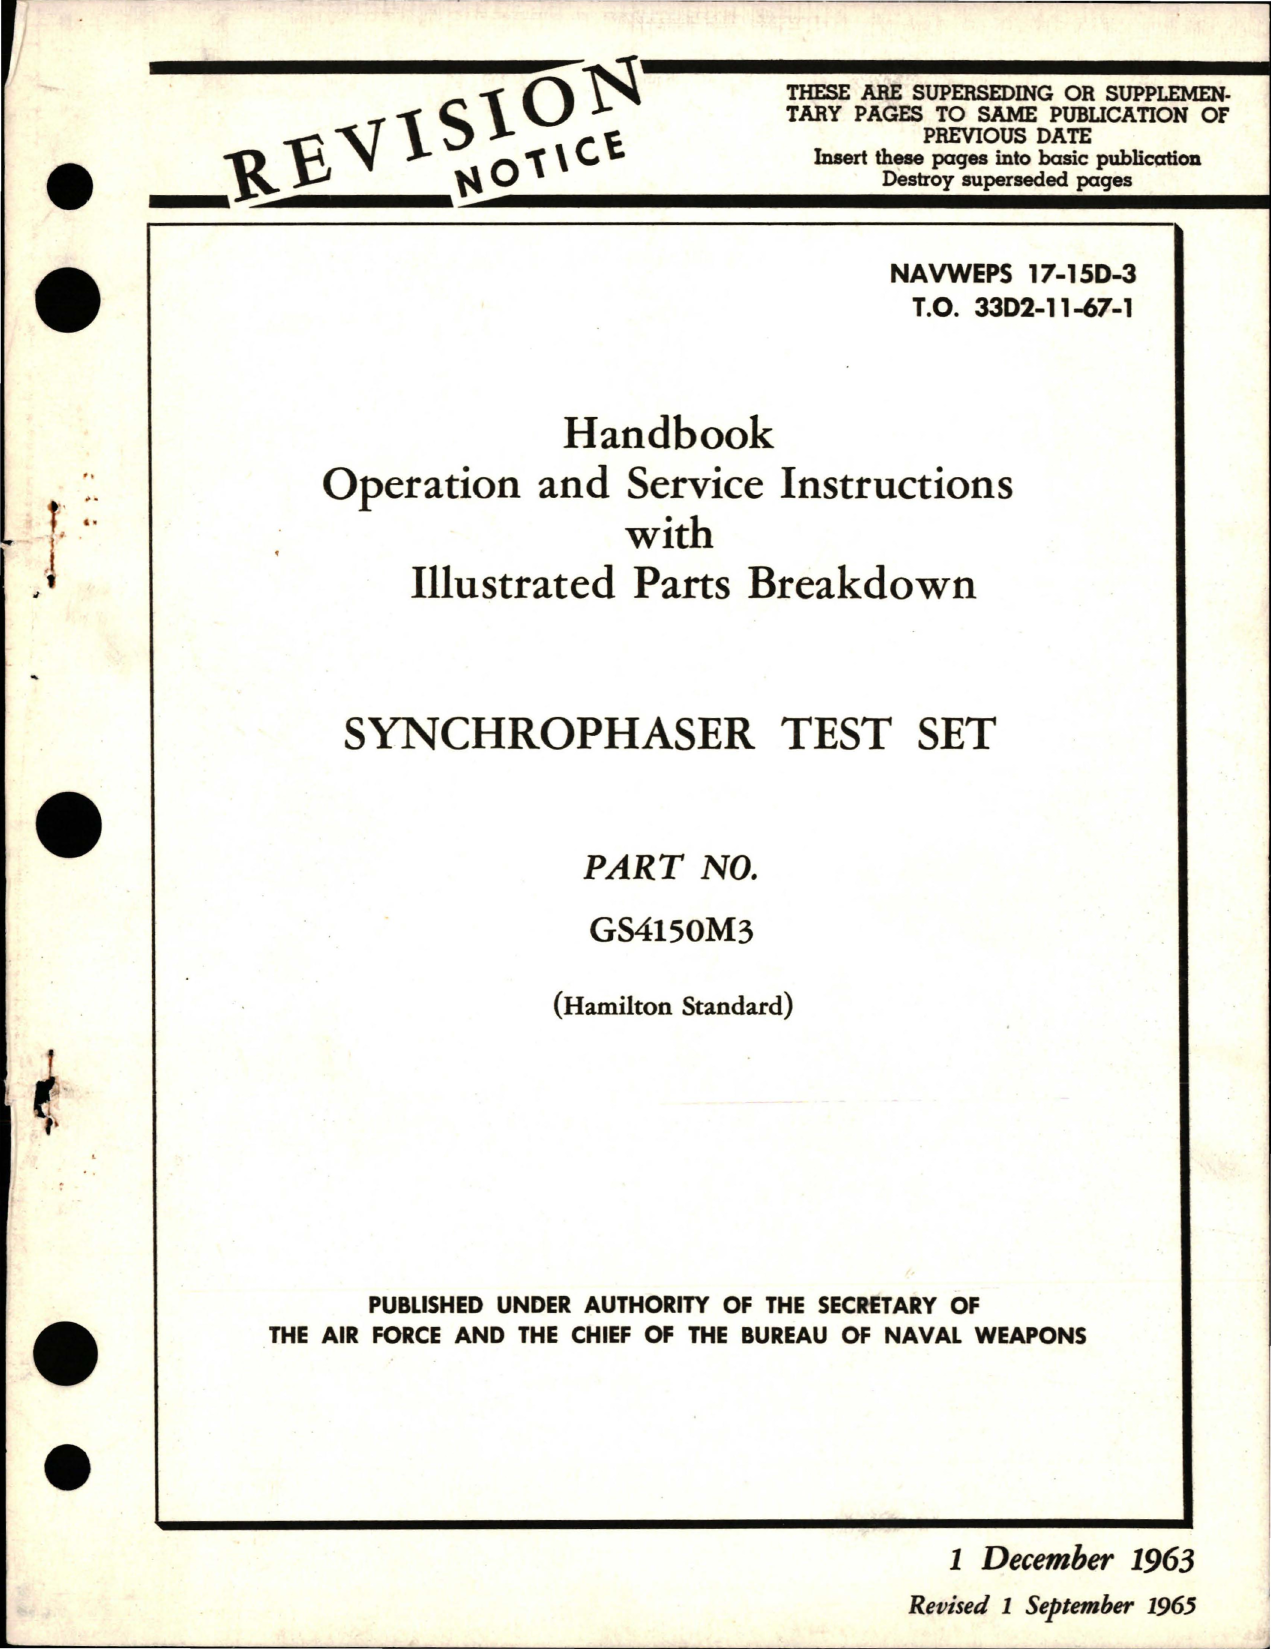 Sample page 1 from AirCorps Library document: Operation, Service Instructions with Parts for Synchrophaser Test Set - Part GS4150M3